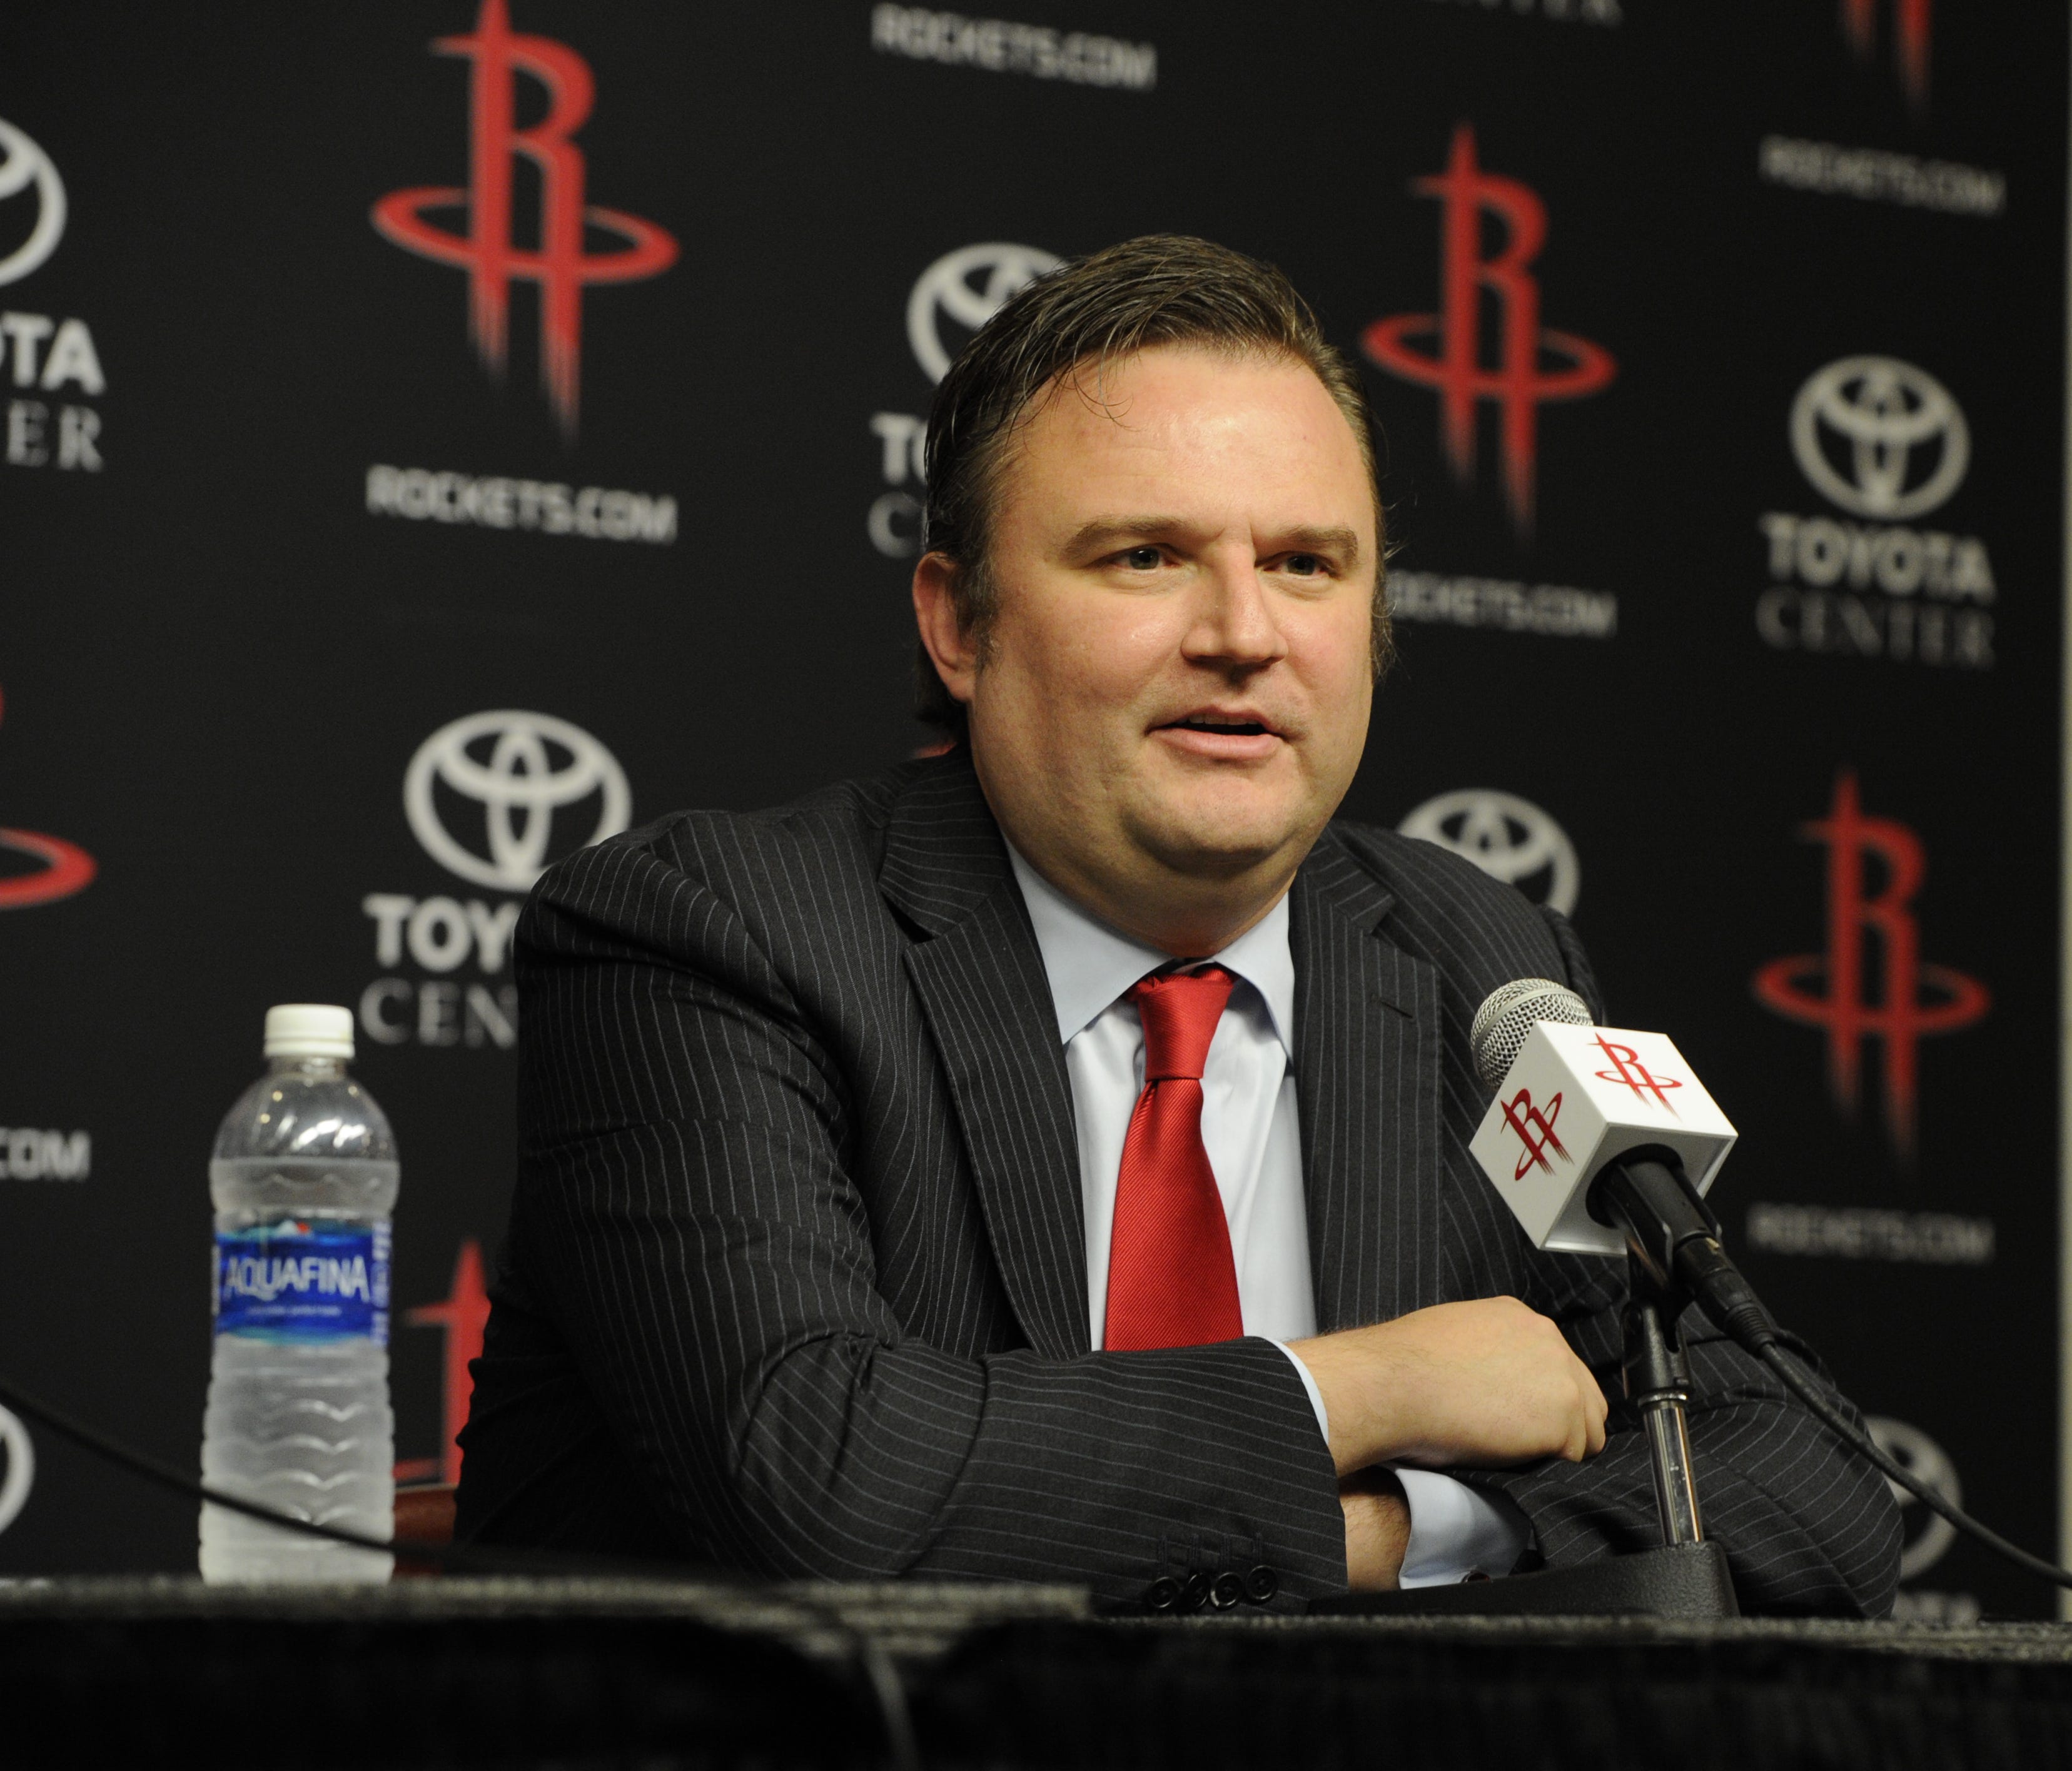 Houston Rockets GM Daryl Morey is interviewed as the Rockets announce D'Antoni as their new head coach on June 1, 2016.